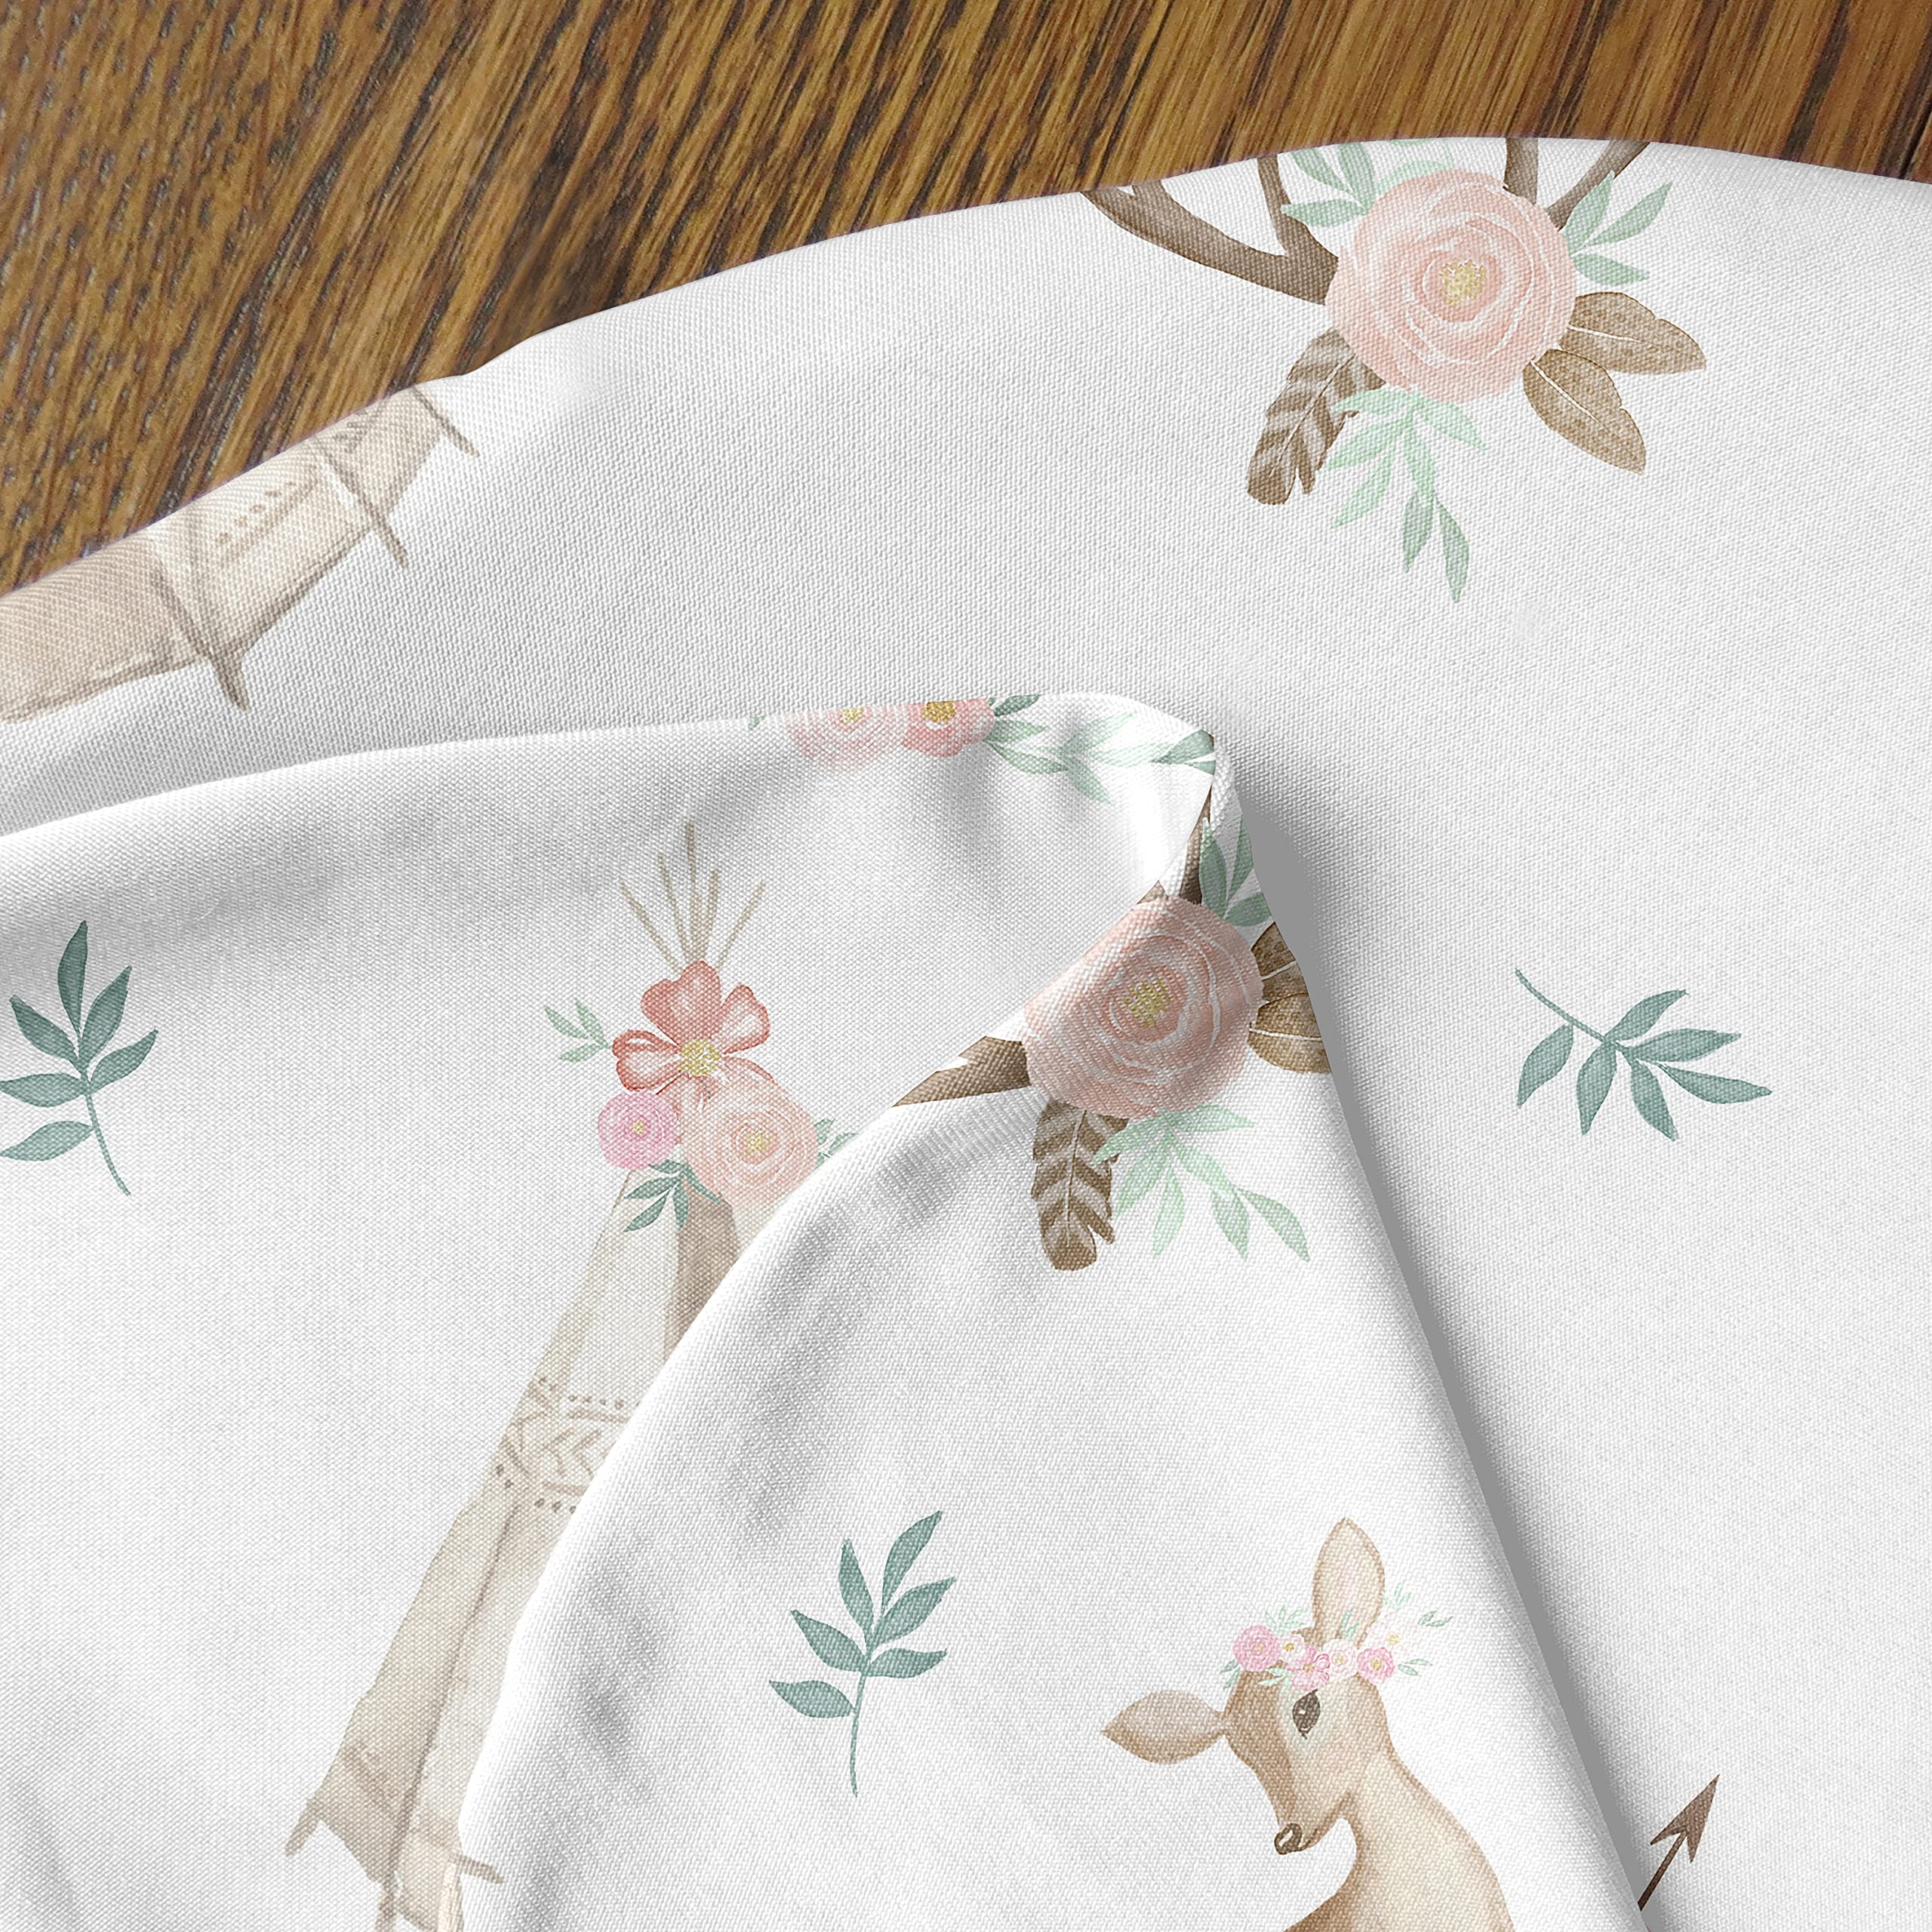 Sweet Jojo Designs Woodland Deer Floral Nursing Pillow Cover Breastfeeding Pillowcase for Newborn Infant Bottle Breast Feeding Pillow NOT Included - Blush Pink Mint Green Boho Watercolor Forest Animal